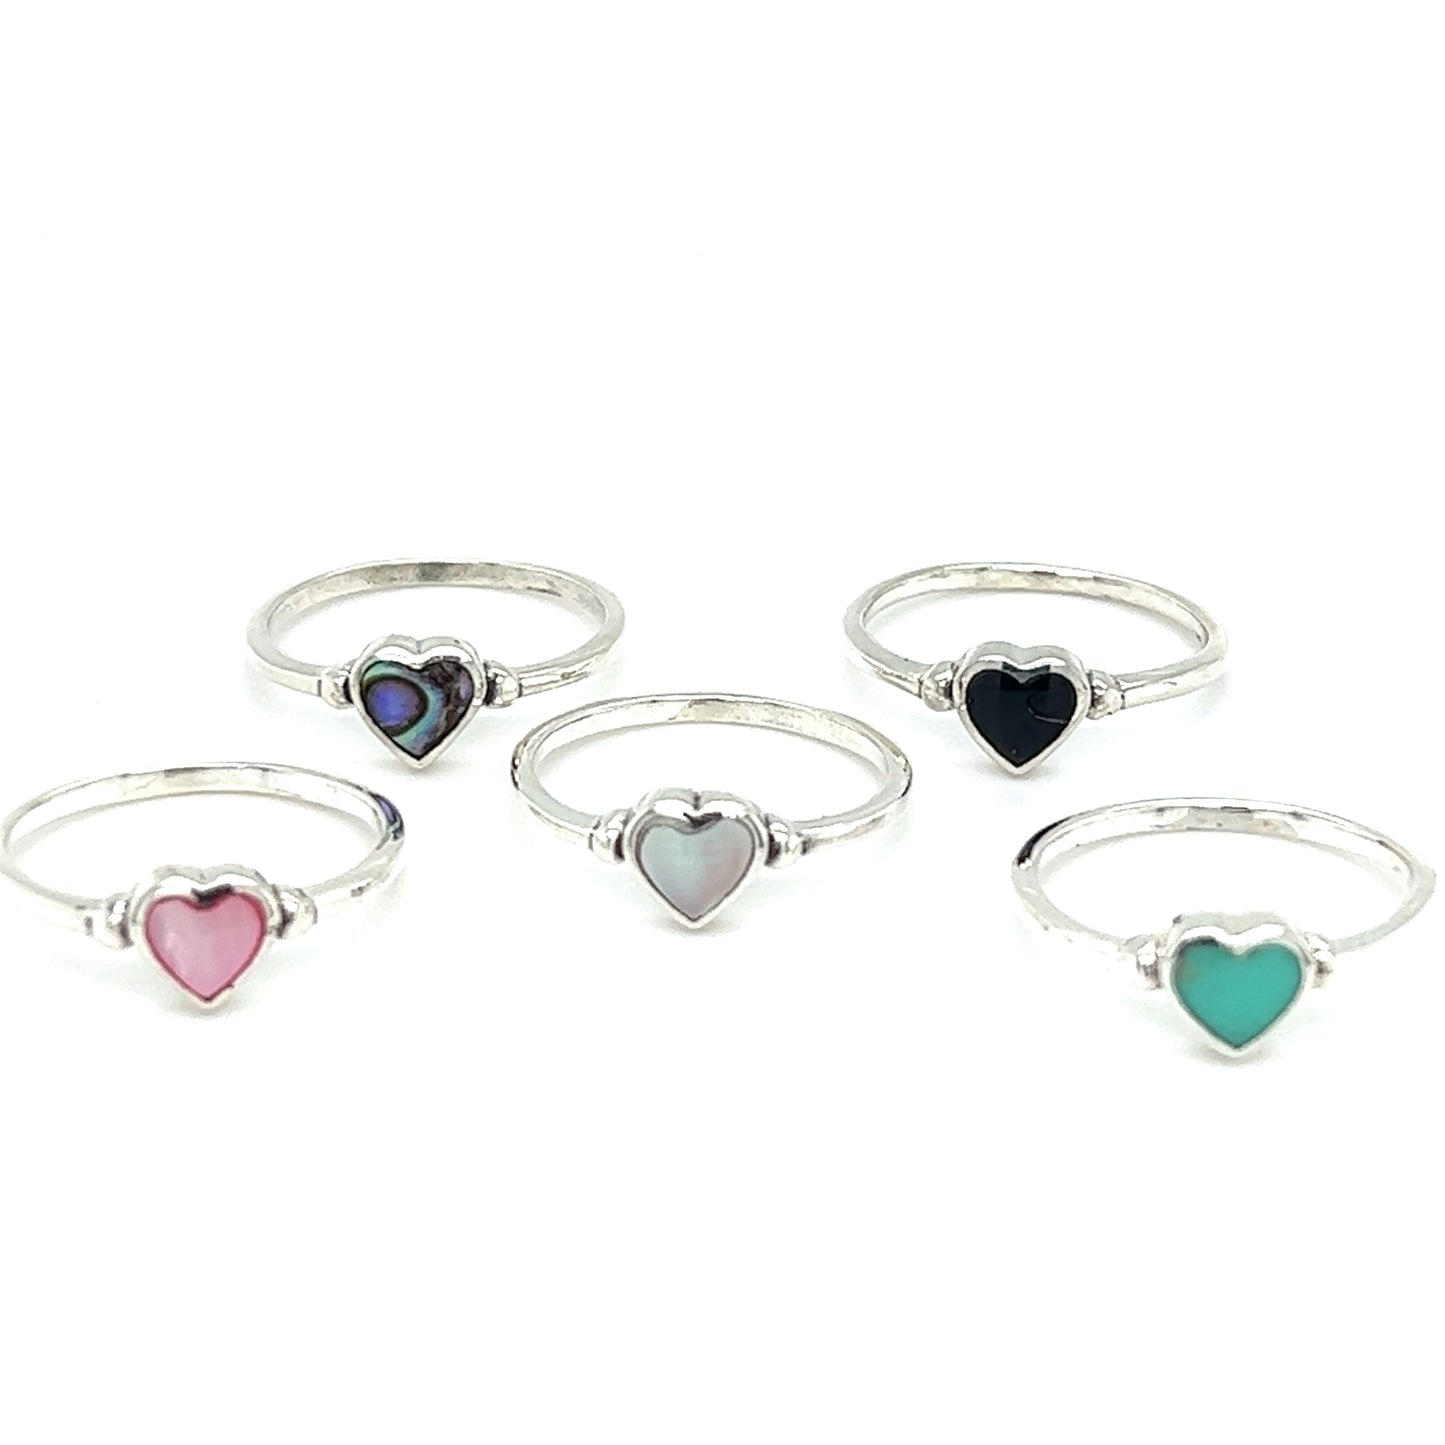 Four Dainty Inlaid Heart Rings with inlayed colored stones.